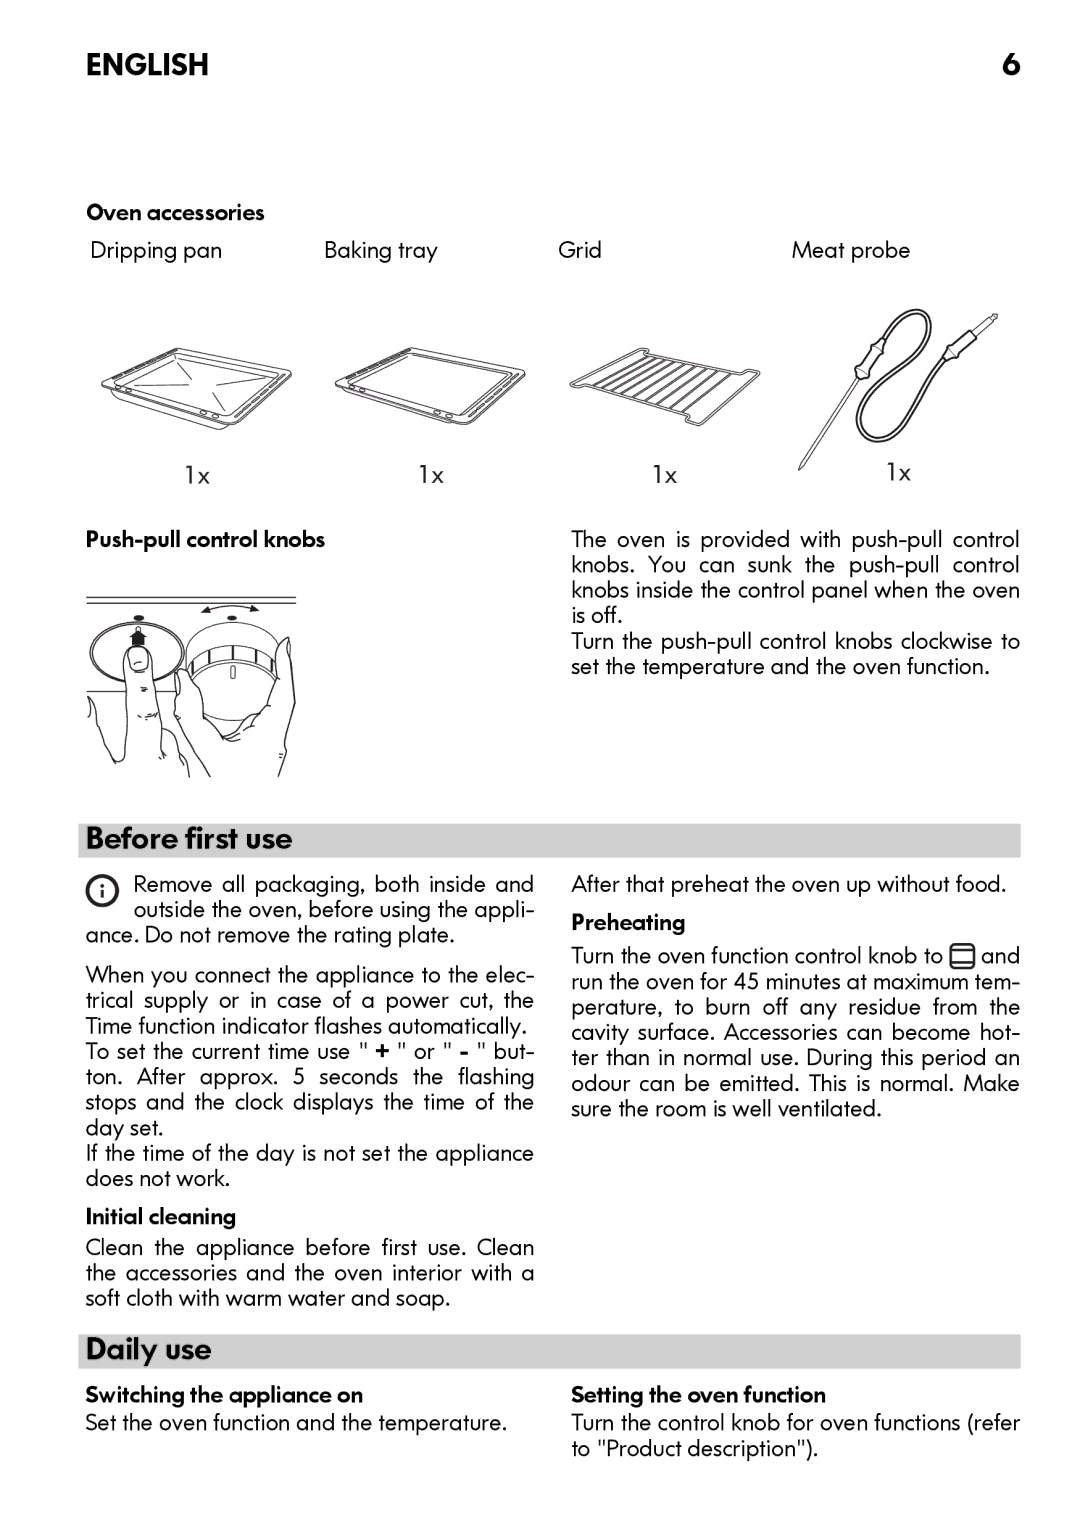 IKEA OV9 manual Before first use, Daily use, Is off, Set the temperature and the oven function 